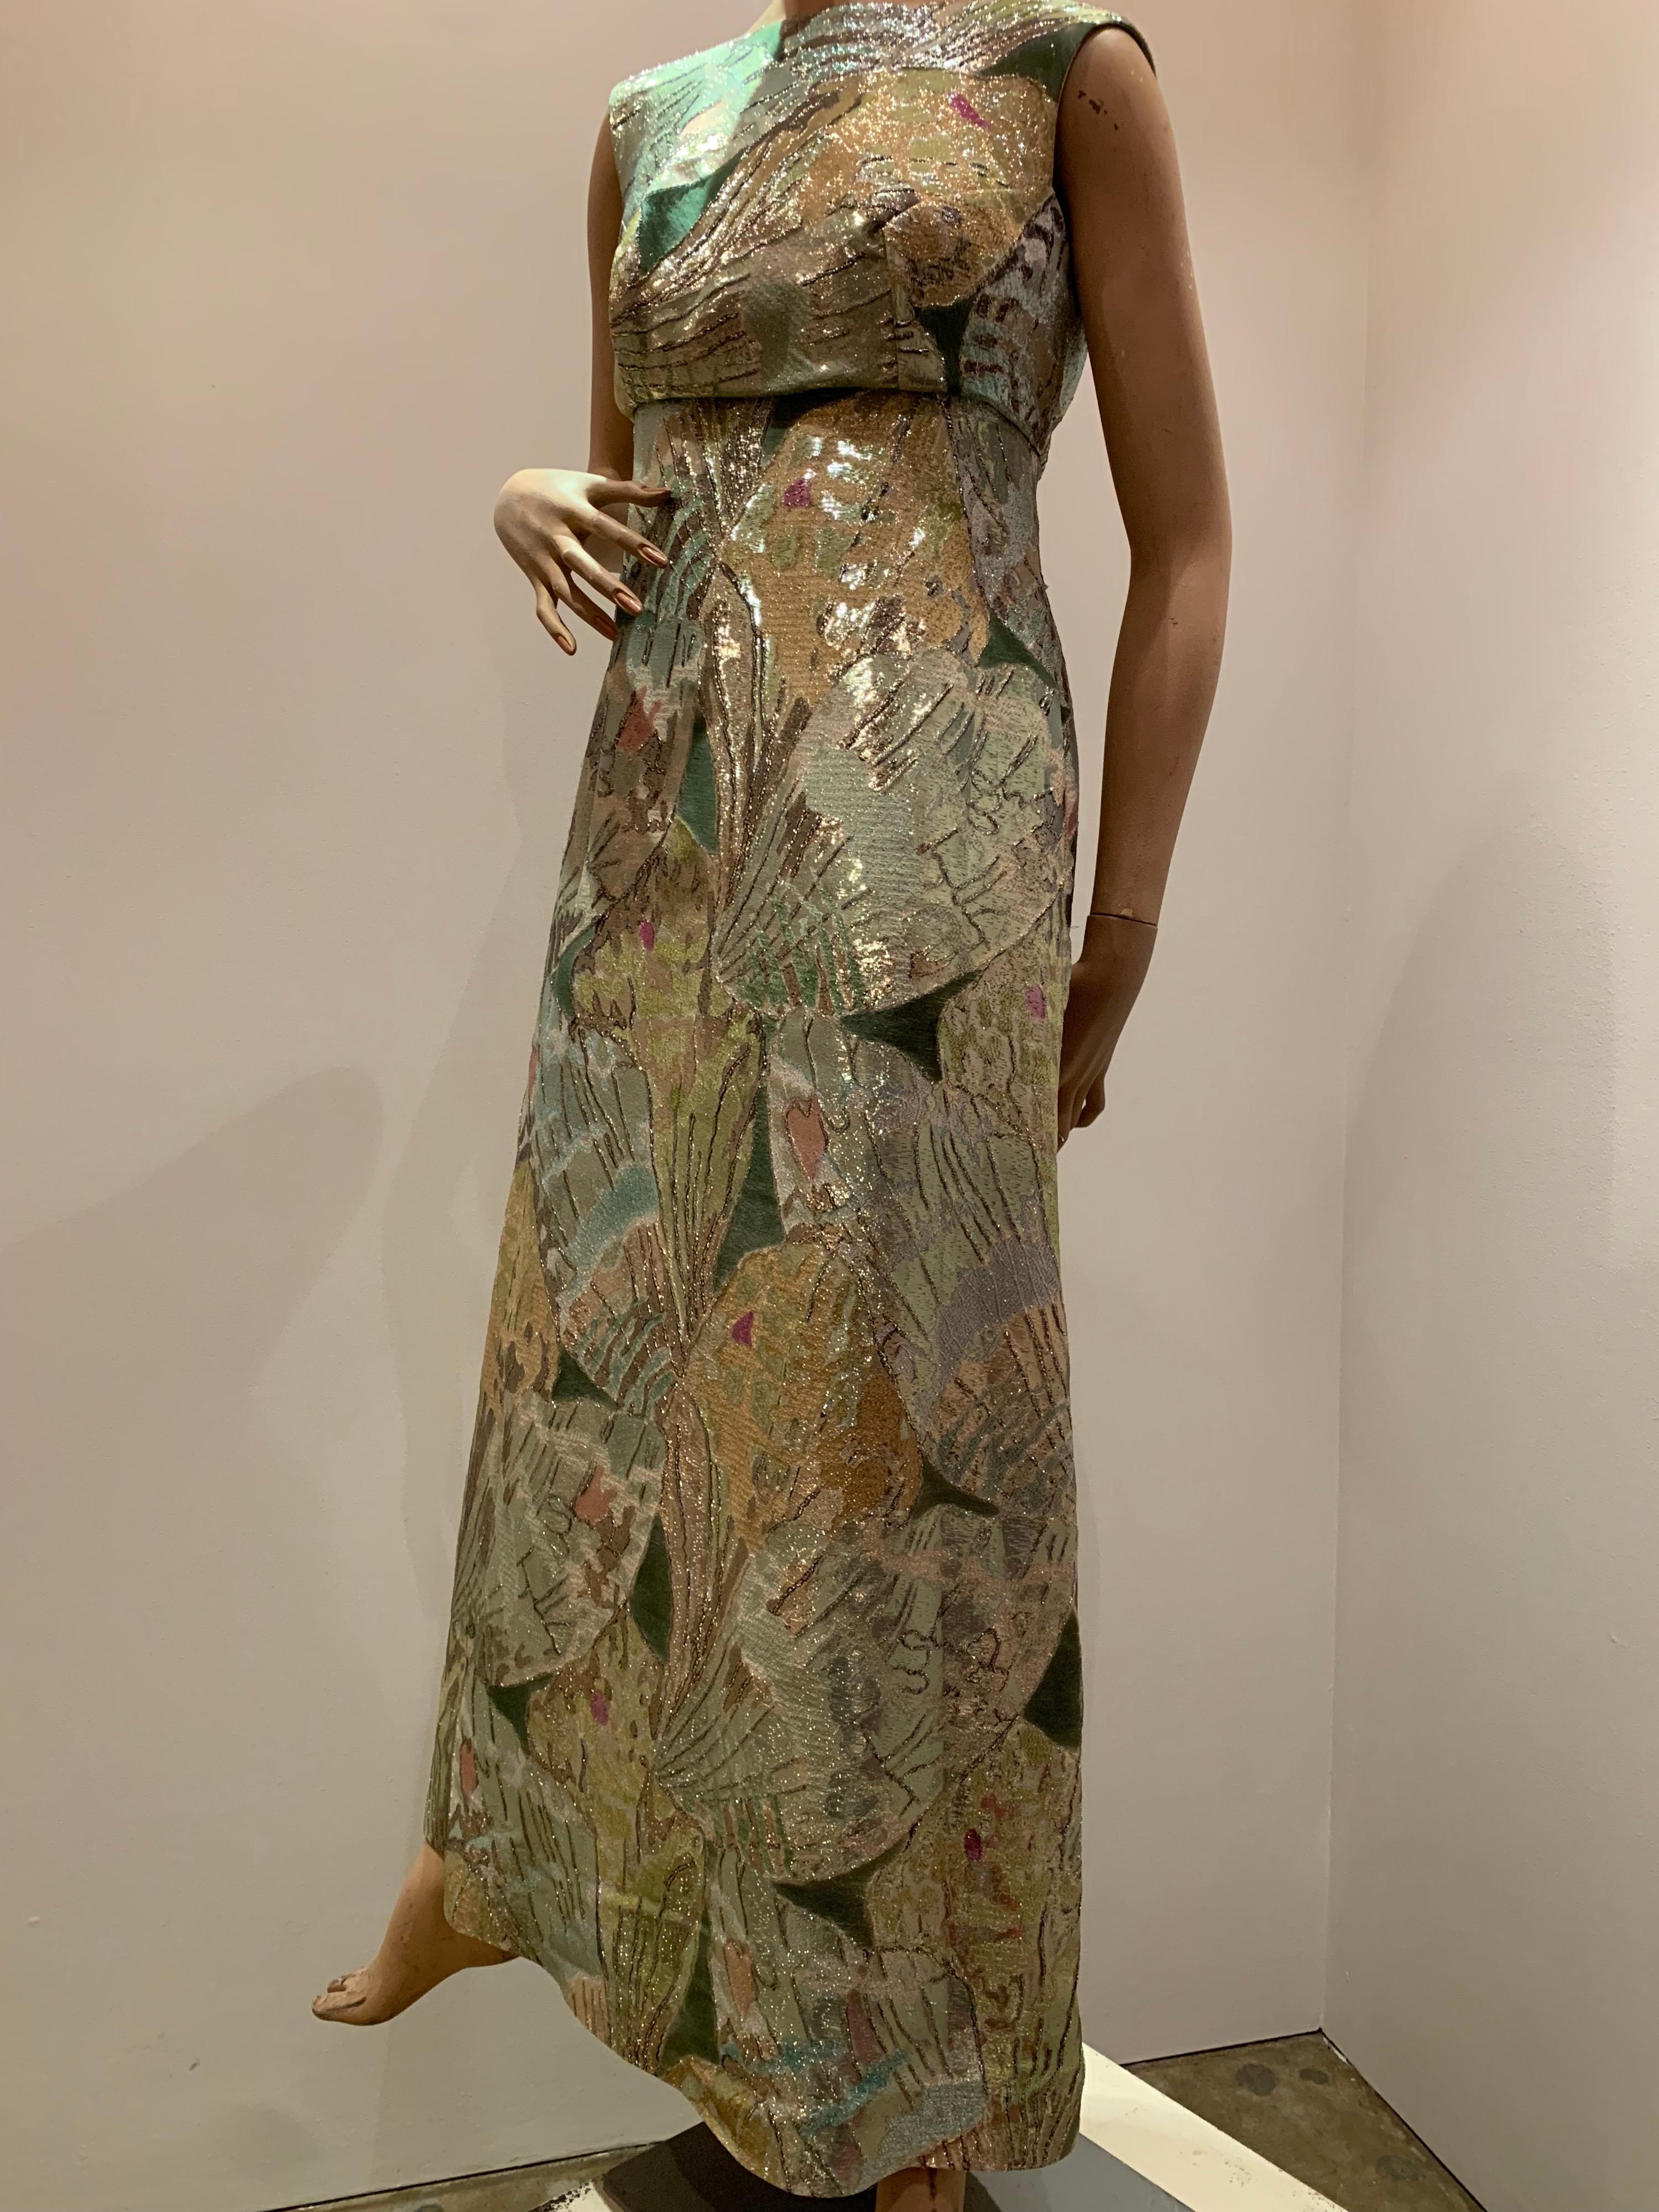 1960s Rochá  Butterfly Wing Patterned Lamé Brocade Empire Evening Gown. Really spectacular fabric and a low dipping back accented with a bow. Fully lined with zippered back. Fits a generous bust.